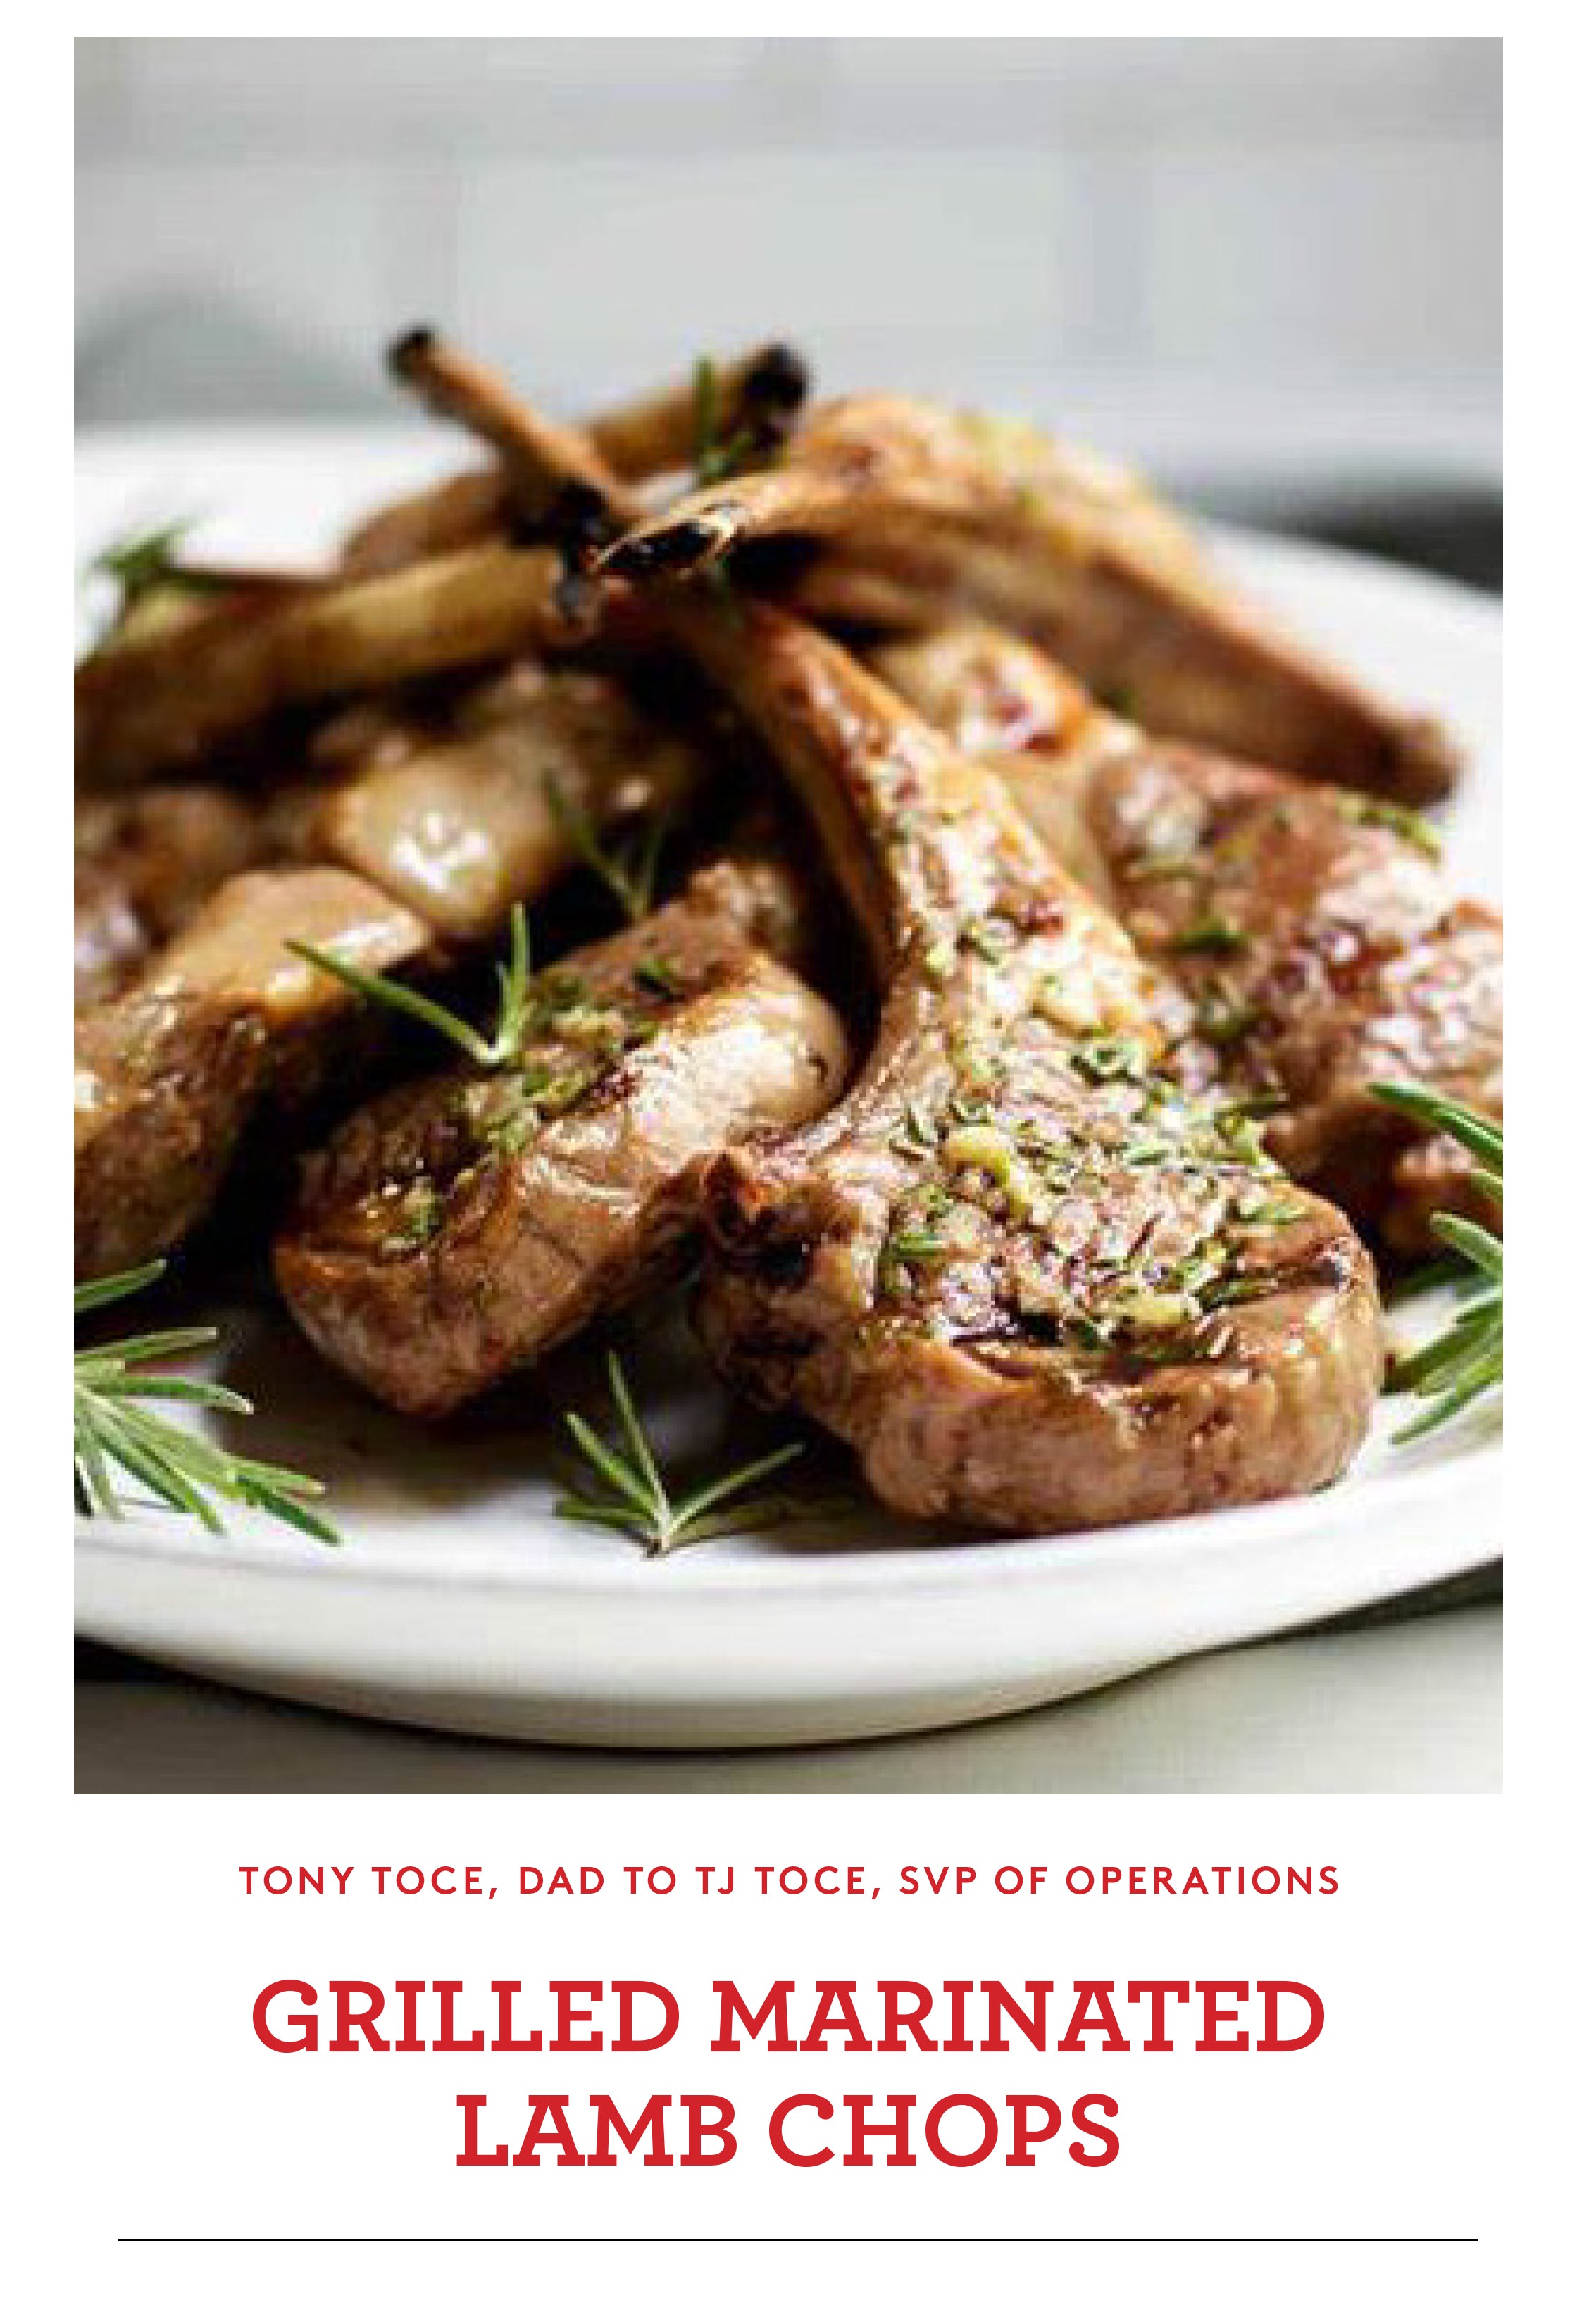 THE TCE GRILLED MARINATED LAMB CHOPS